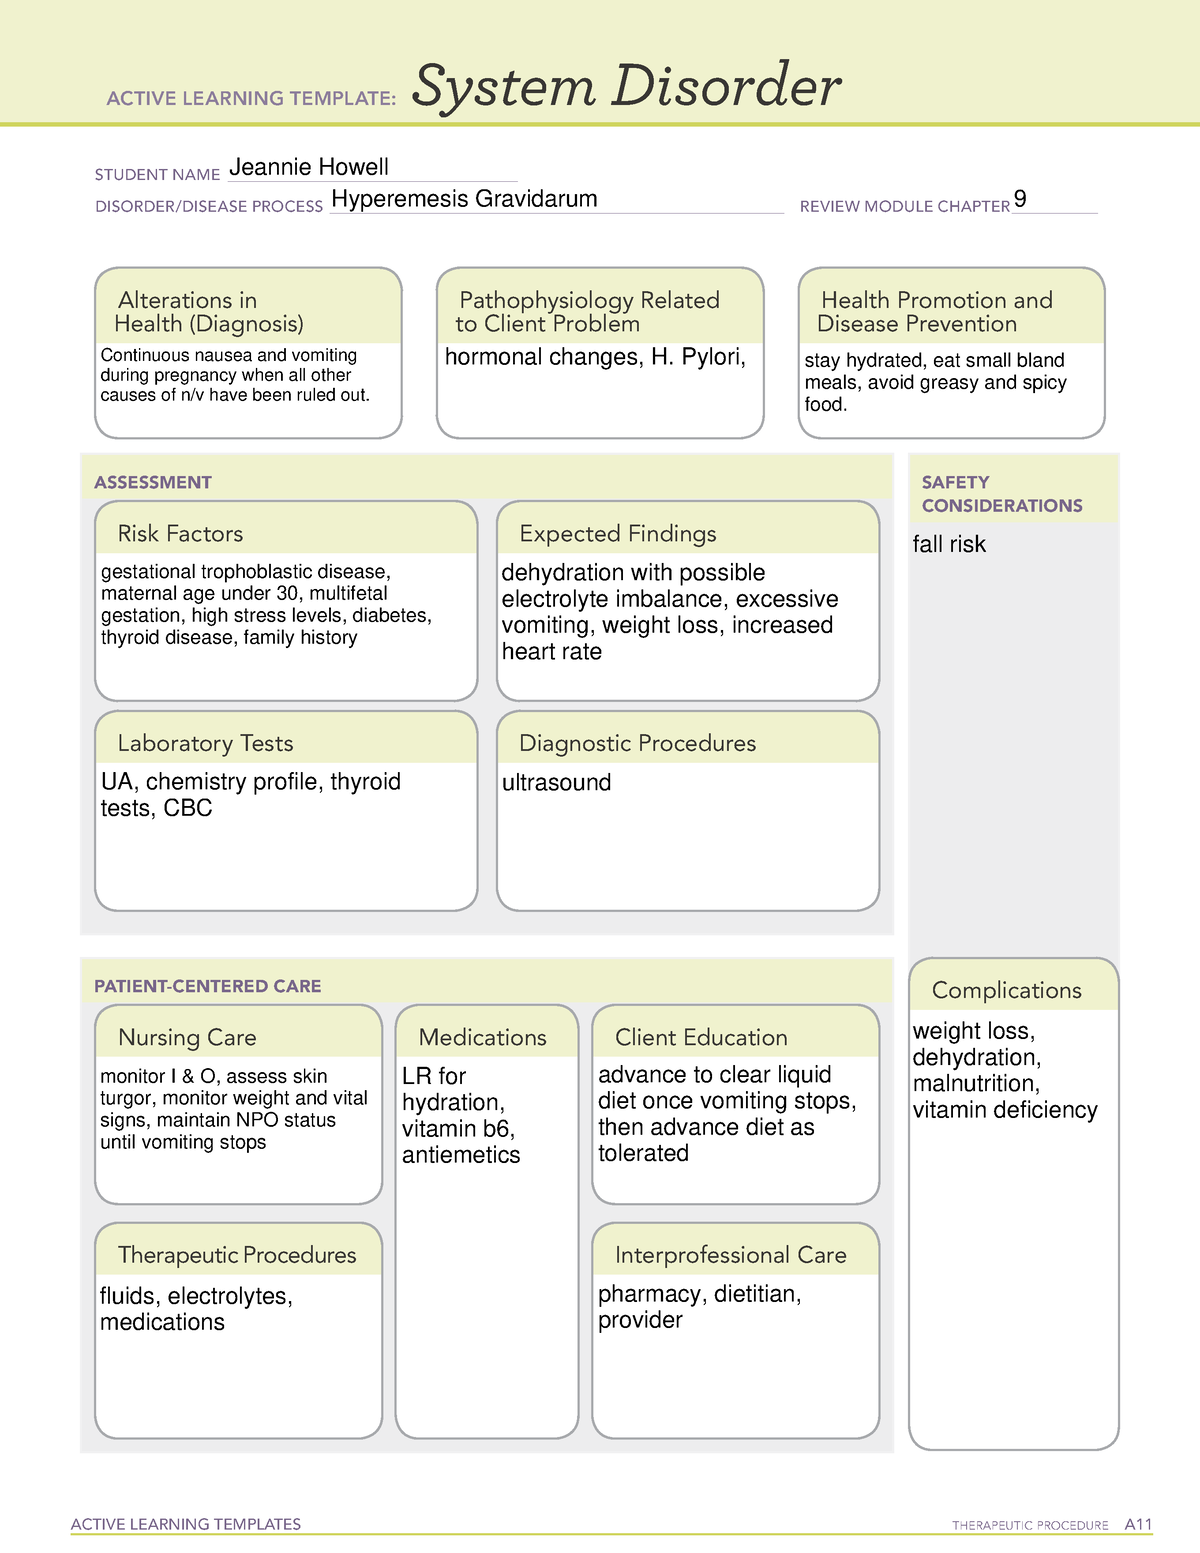 Active Learning Template hyperemesis ACTIVE LEARNING TEMPLATES